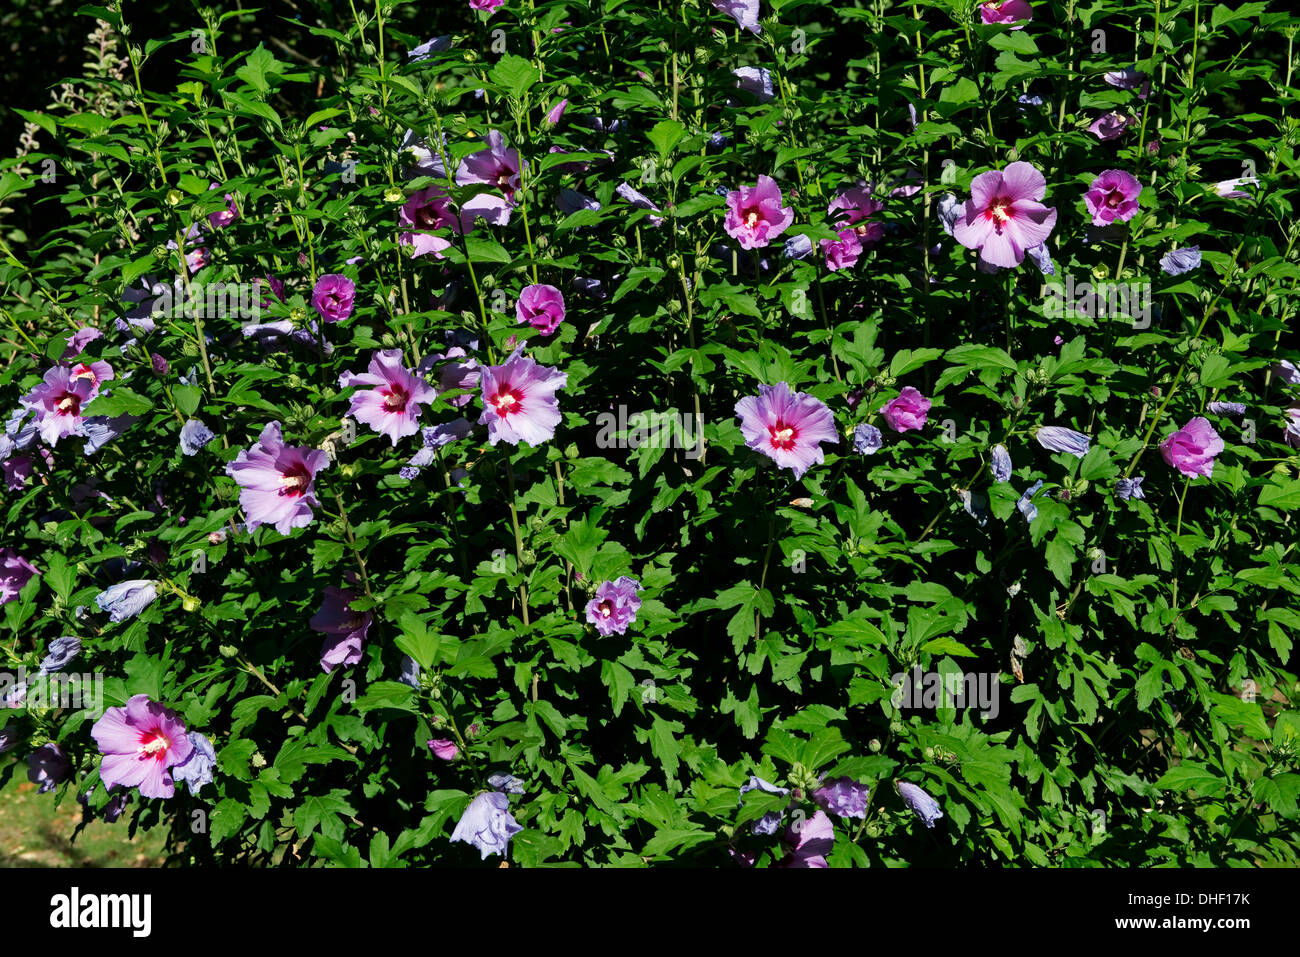 A flowering shrub, Hibiscus syriacus, on the banks of the Dordogne, Gironde, France Stock Photo